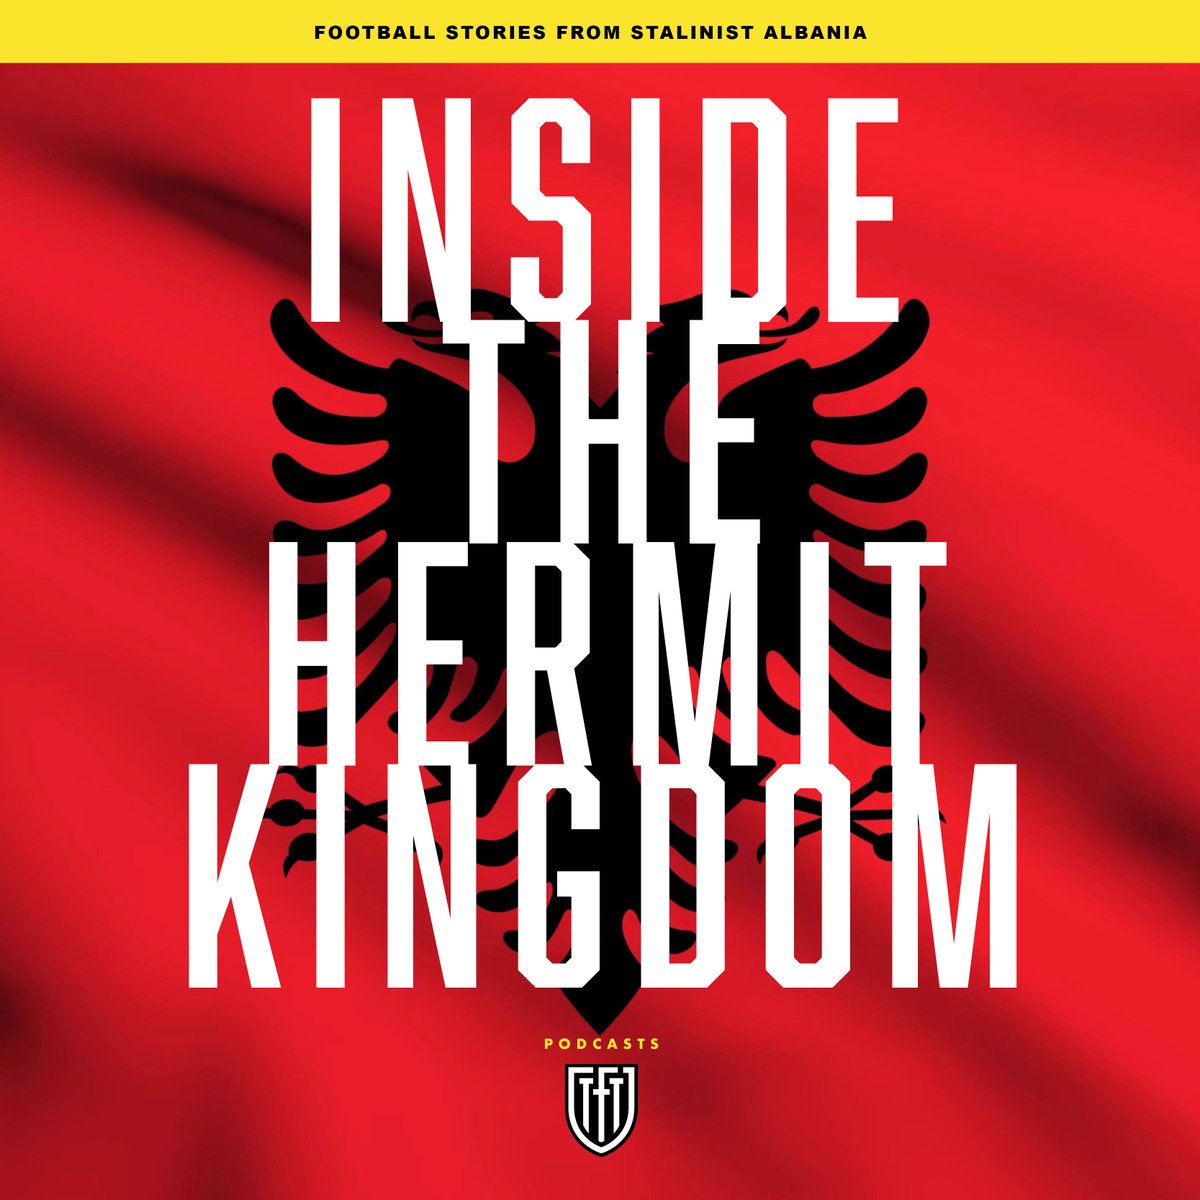 🇦🇱 Inside the Hermit Kingdom: football stories from Stalinist Albania, with author @fussballgeekz, @All_Blue_Daze, @Scraggy_74 and @yad_williams. Apple bit.ly/3oyPu89 Spotify bit.ly/3BVb3Tm Online bit.ly/43q8YvC